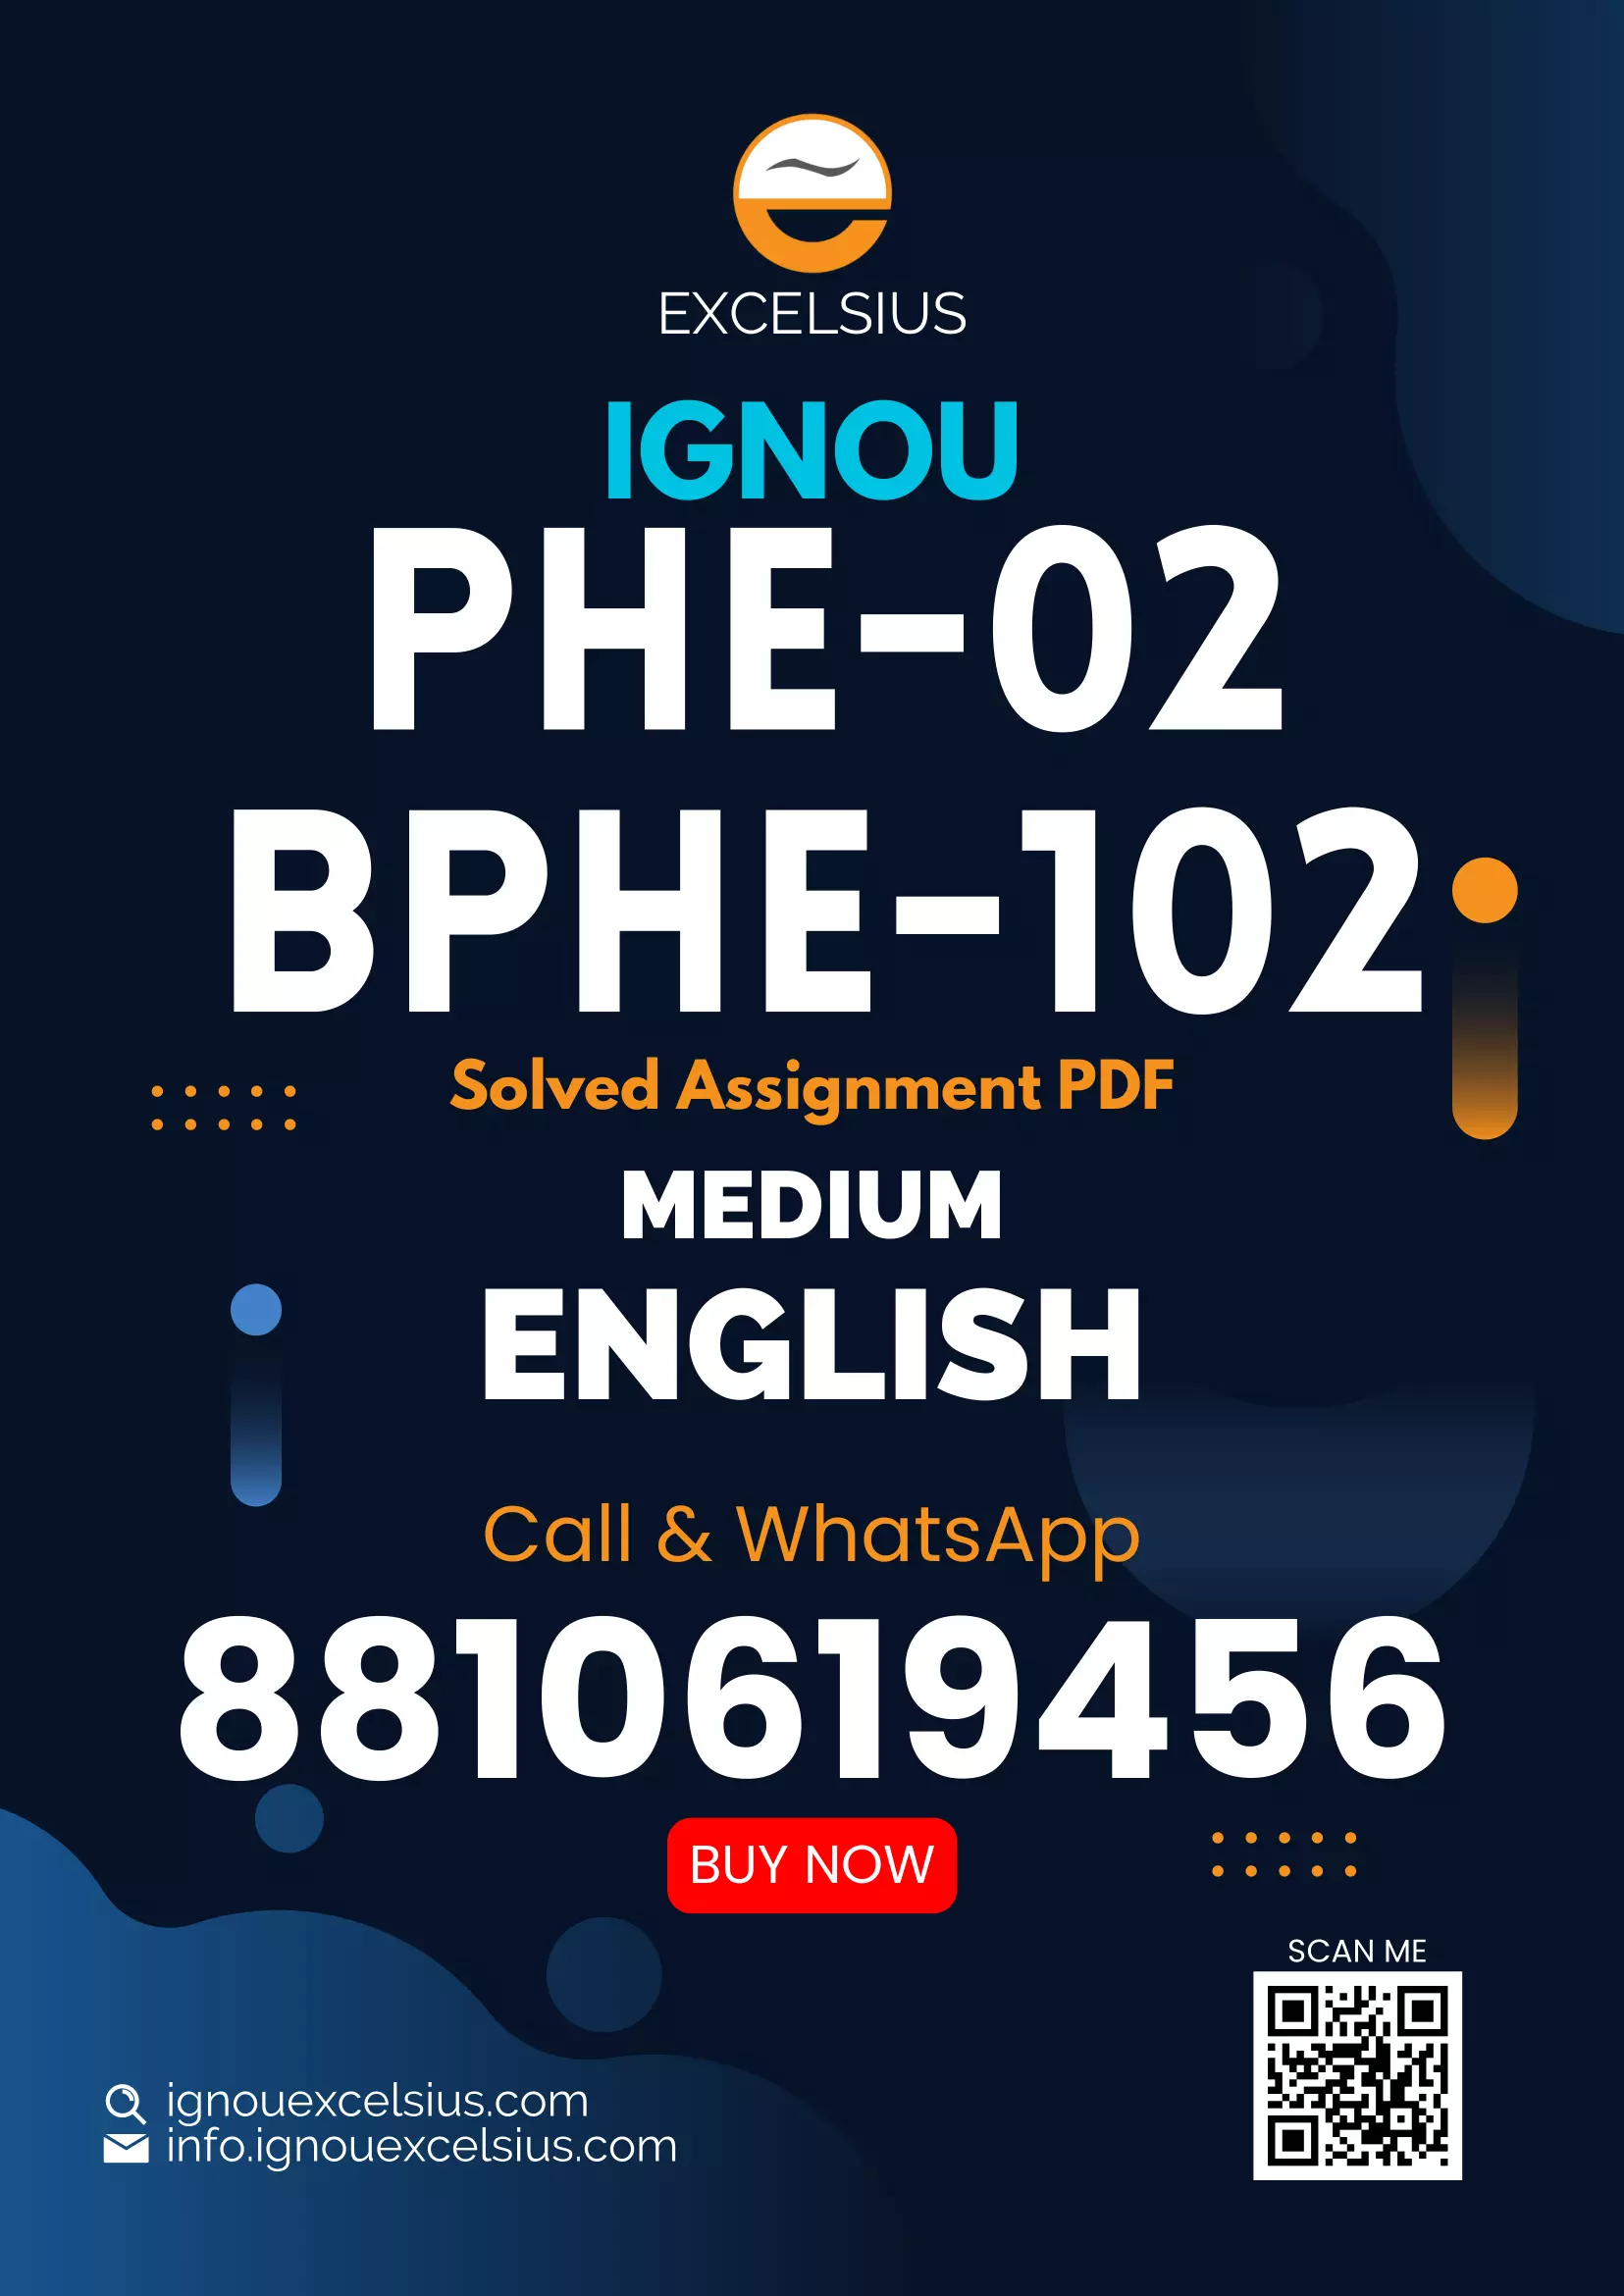 IGNOU BPHE-102/PHE-02 - Oscillations and Waves, Latest Solved Assignment-January 2023 - December 2023